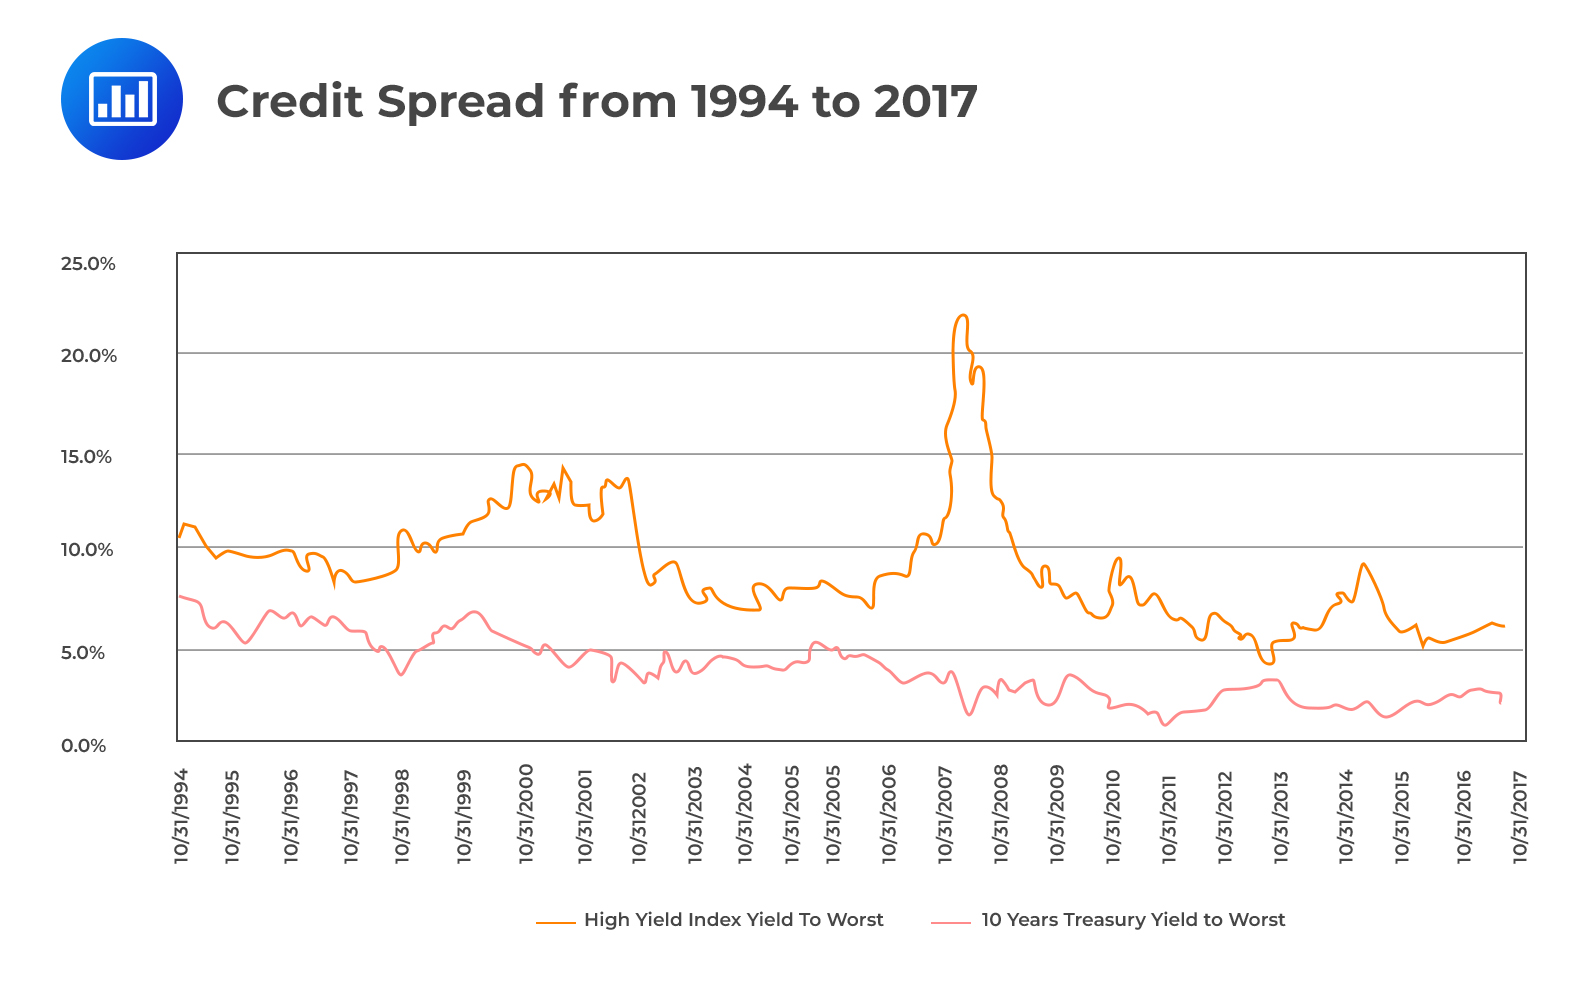 Credit Spread from 1994 to 2017